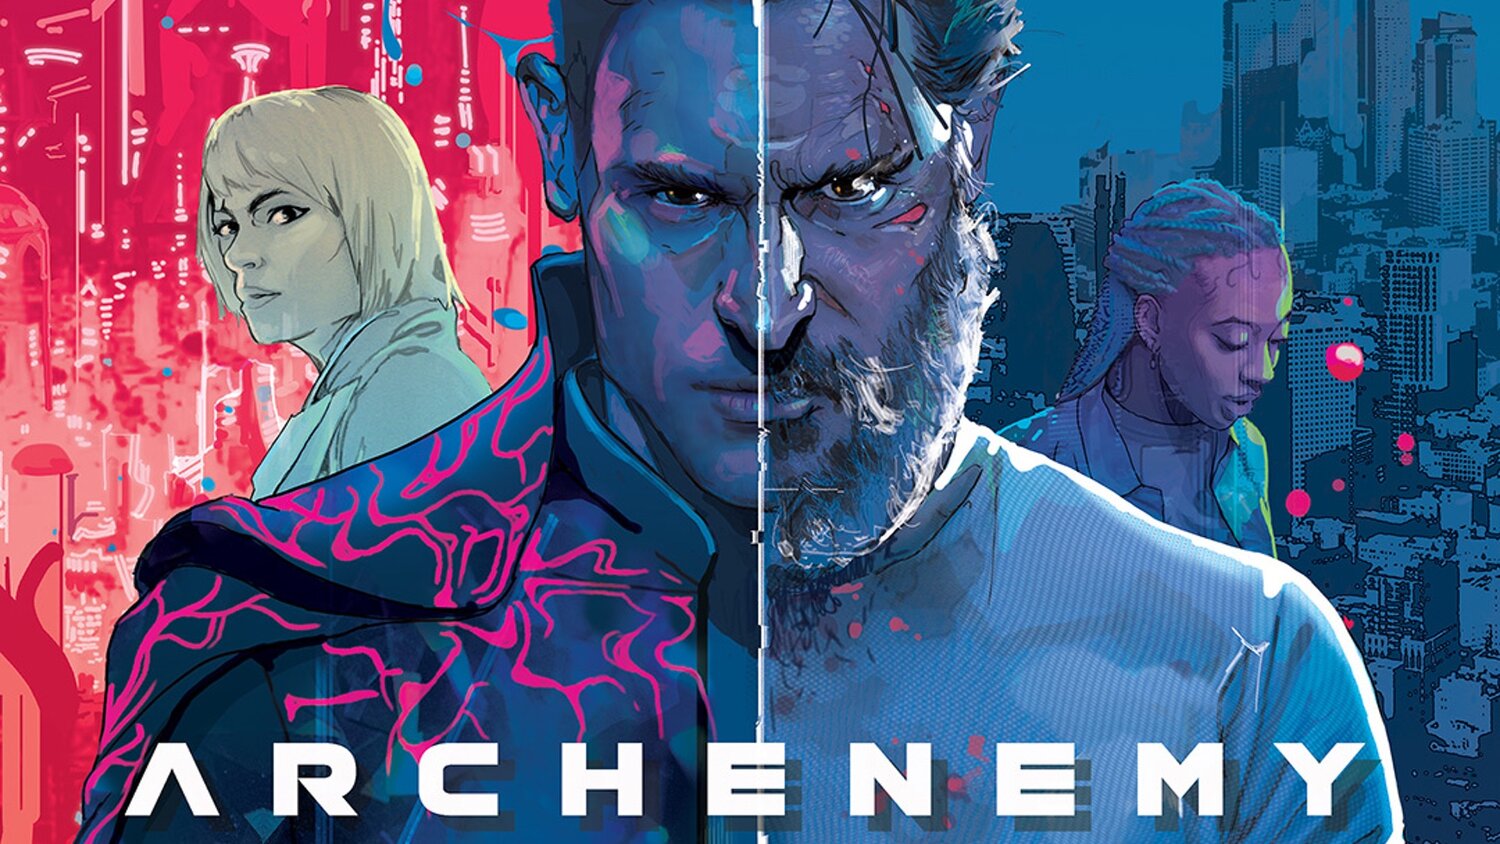 Joe Manganiello Is A Homeless Hero From Another Dimension In Trailer For Archenemy Geektyrant